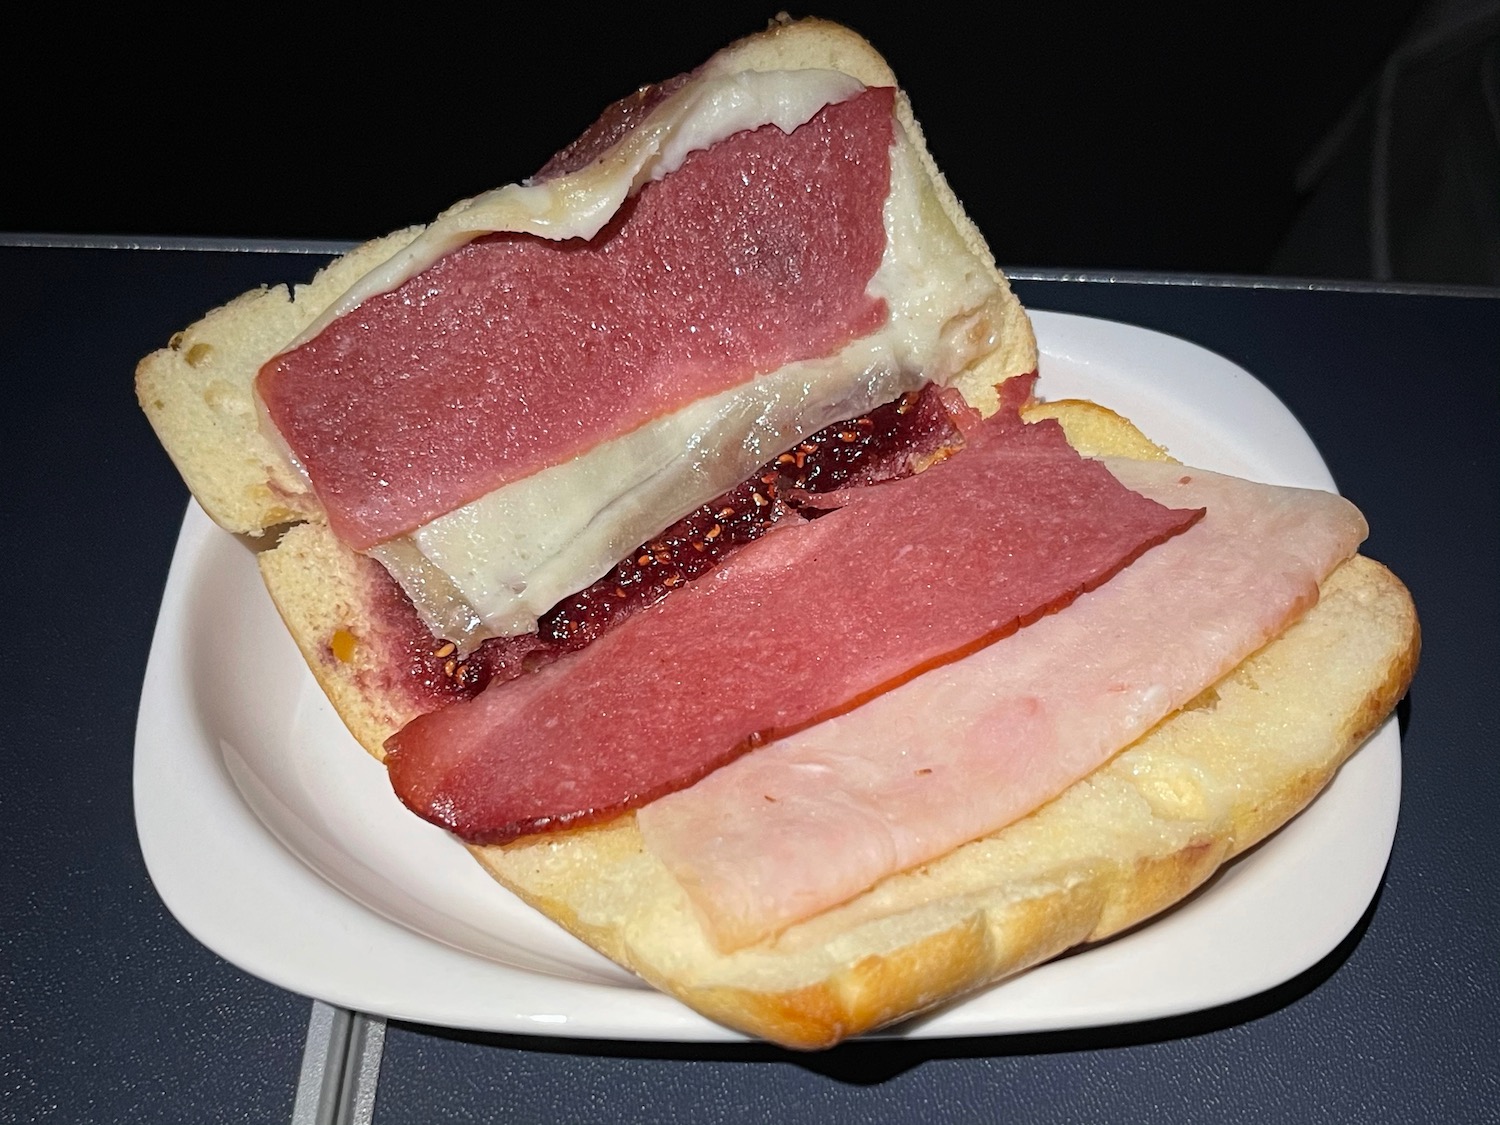 a sandwich with meat and cheese on a plate